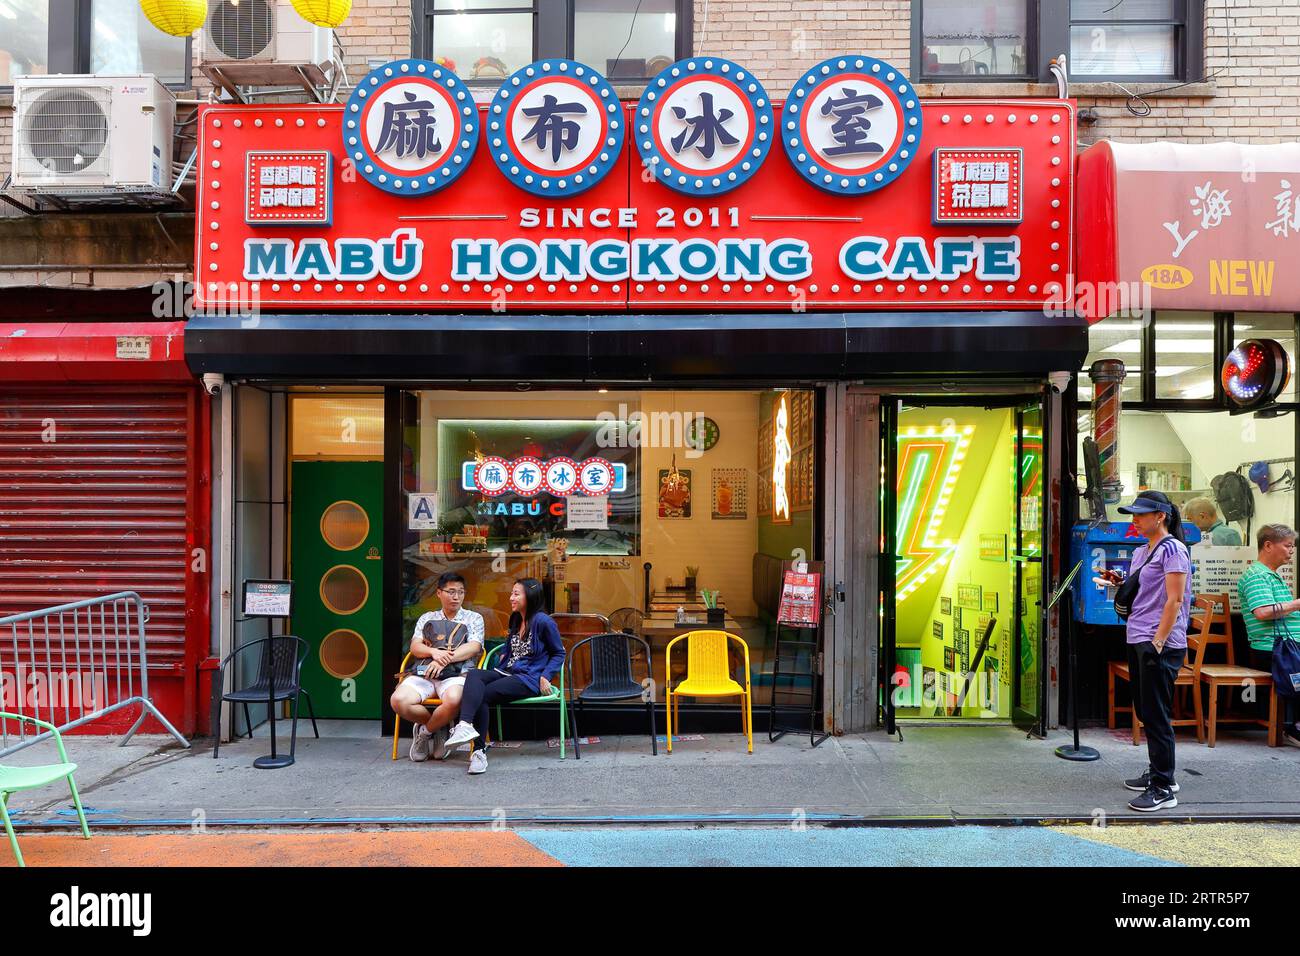 Mabu Cafe 18 Doyers St New York Nyc Storefront Photo Of A Hong Kong Style Restaurant In Manhattan Chinatown 2RTR5P7 